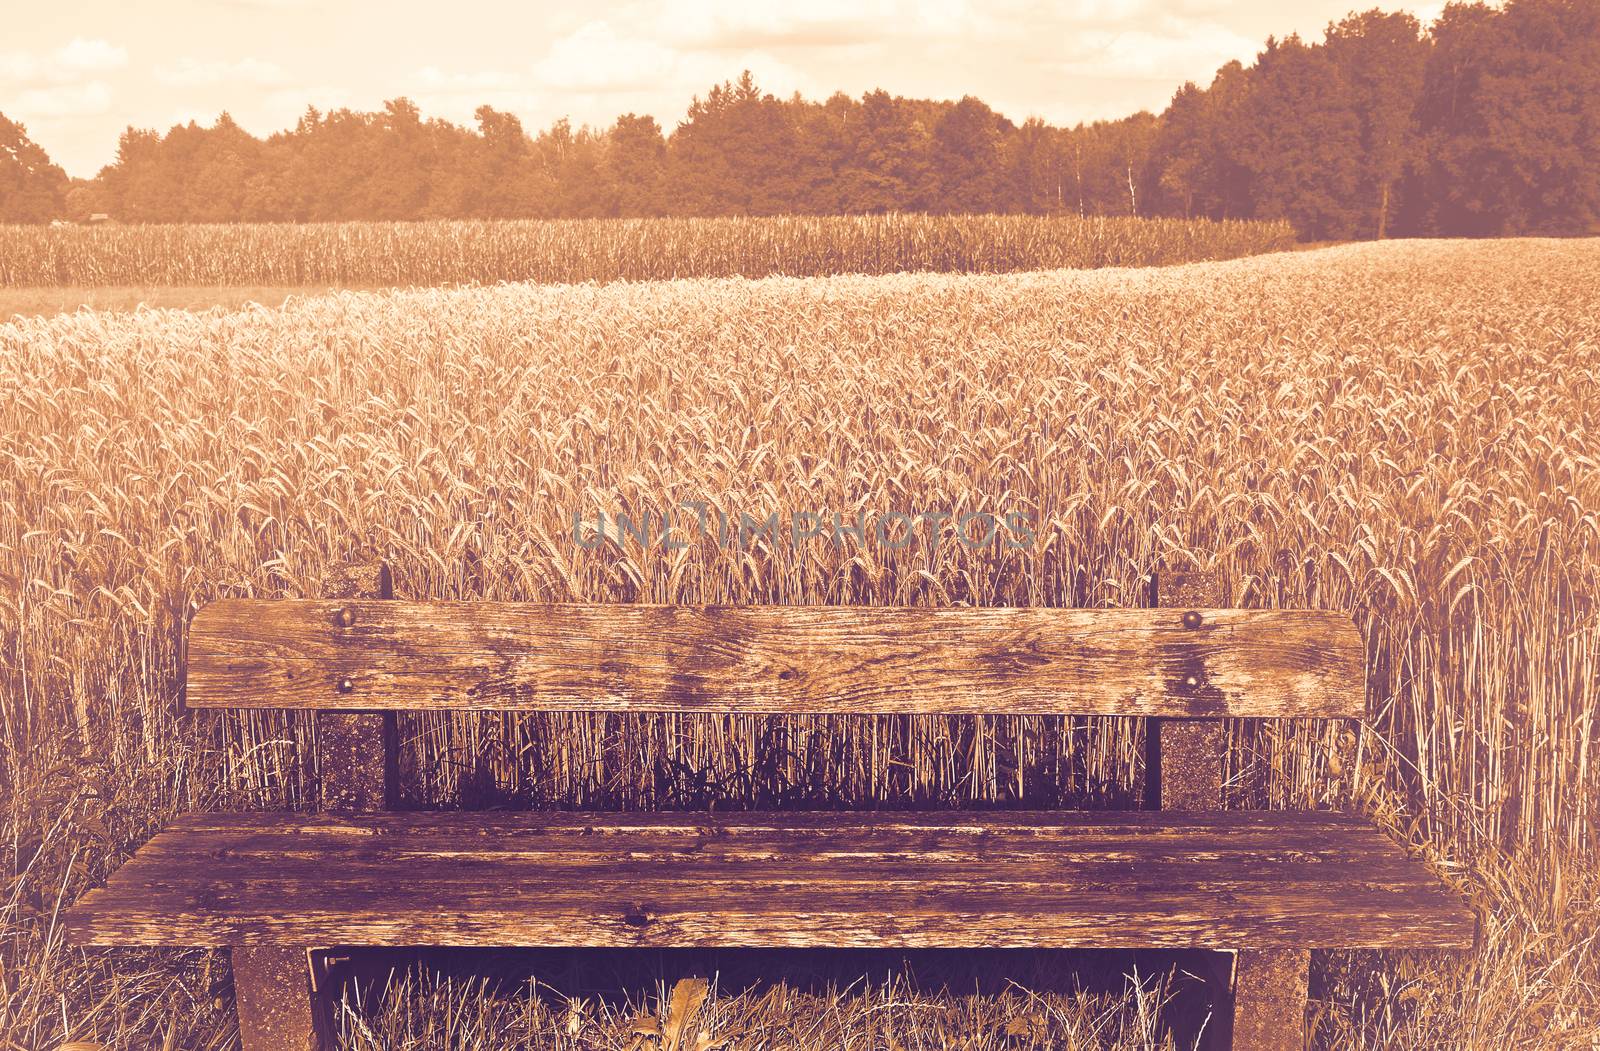 Deserted wooden bench in Germany at dawn in a contemporary style. Vast fields of wheat and corn in Bavaria.